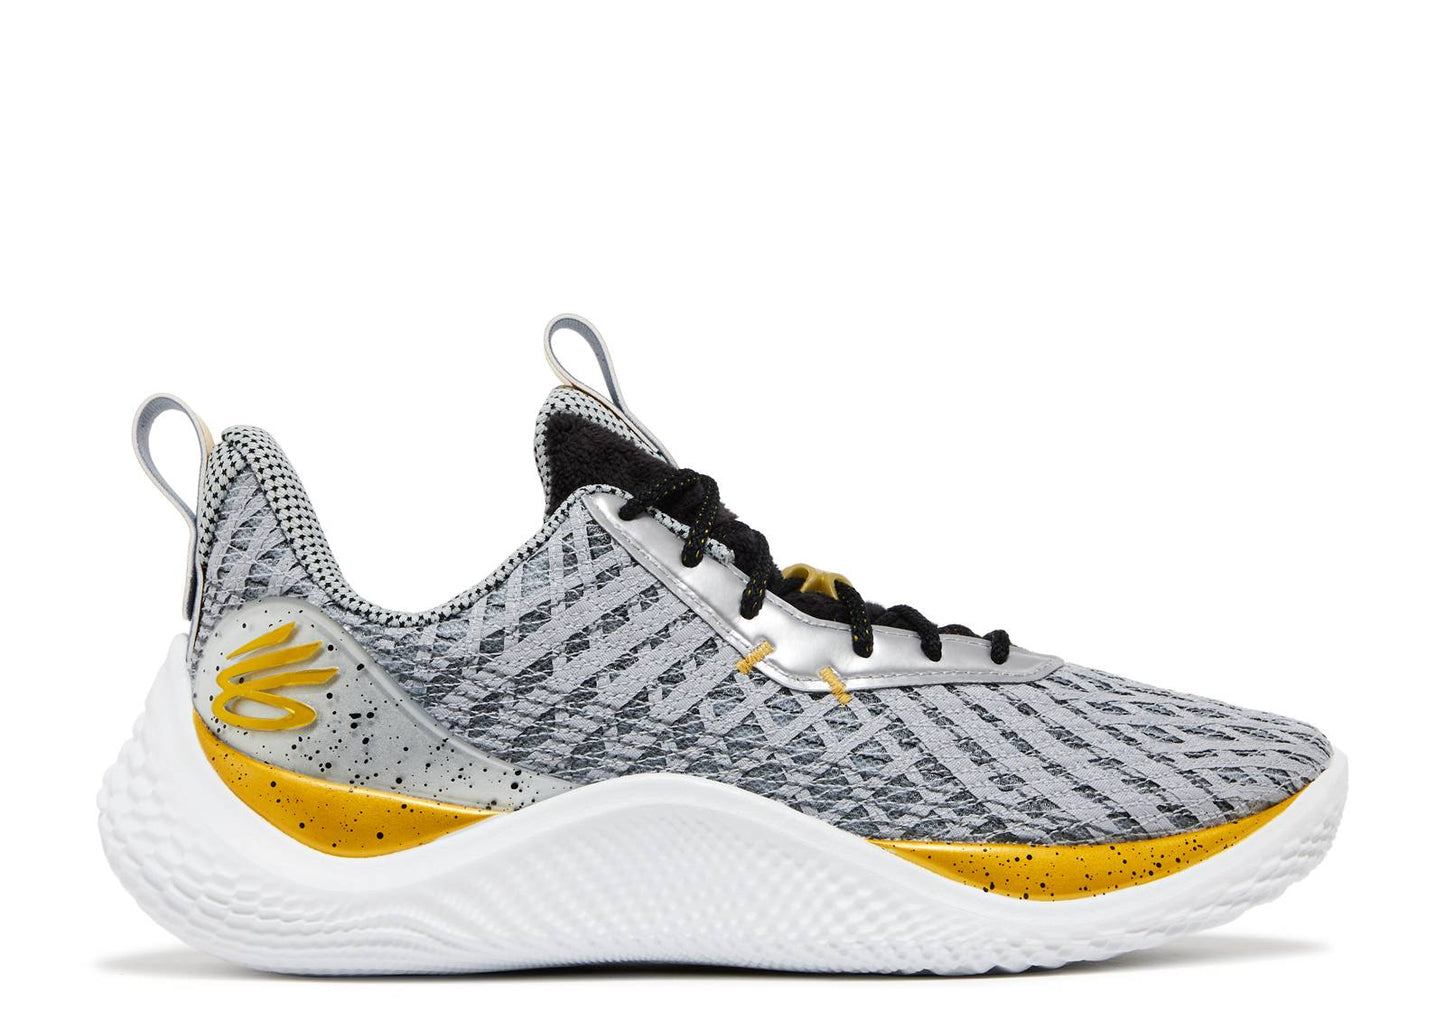 Under Armour Curry Flow 10 "Father to Son"